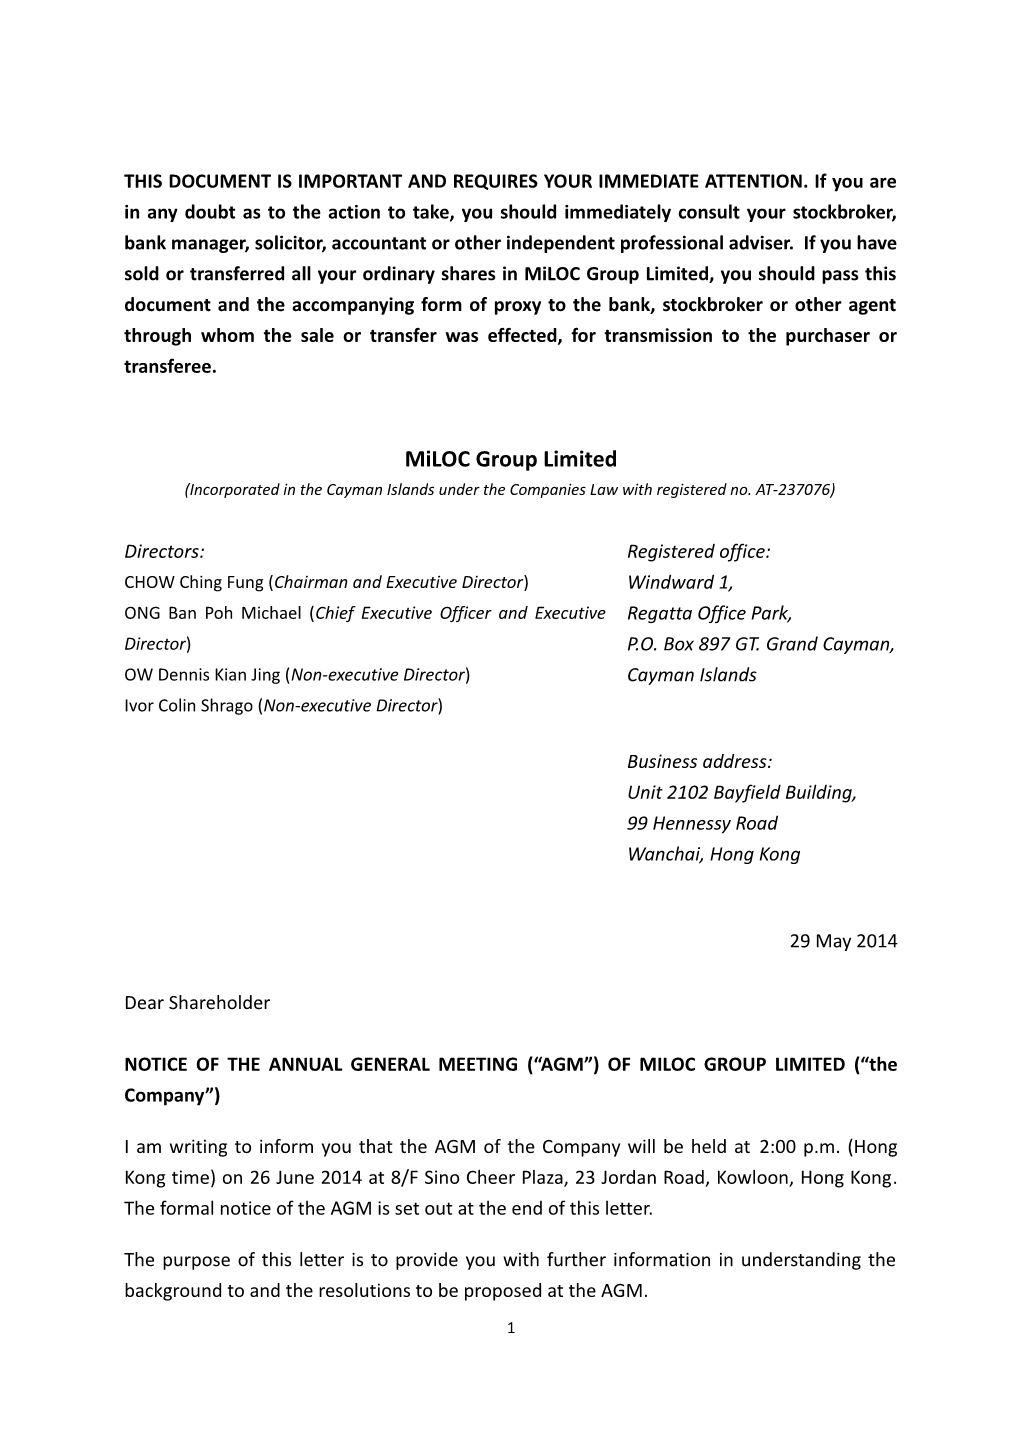 NOTICE of the ANNUAL GENERAL MEETING ( AGM ) of MILOC GROUP LIMITED ( the Company )